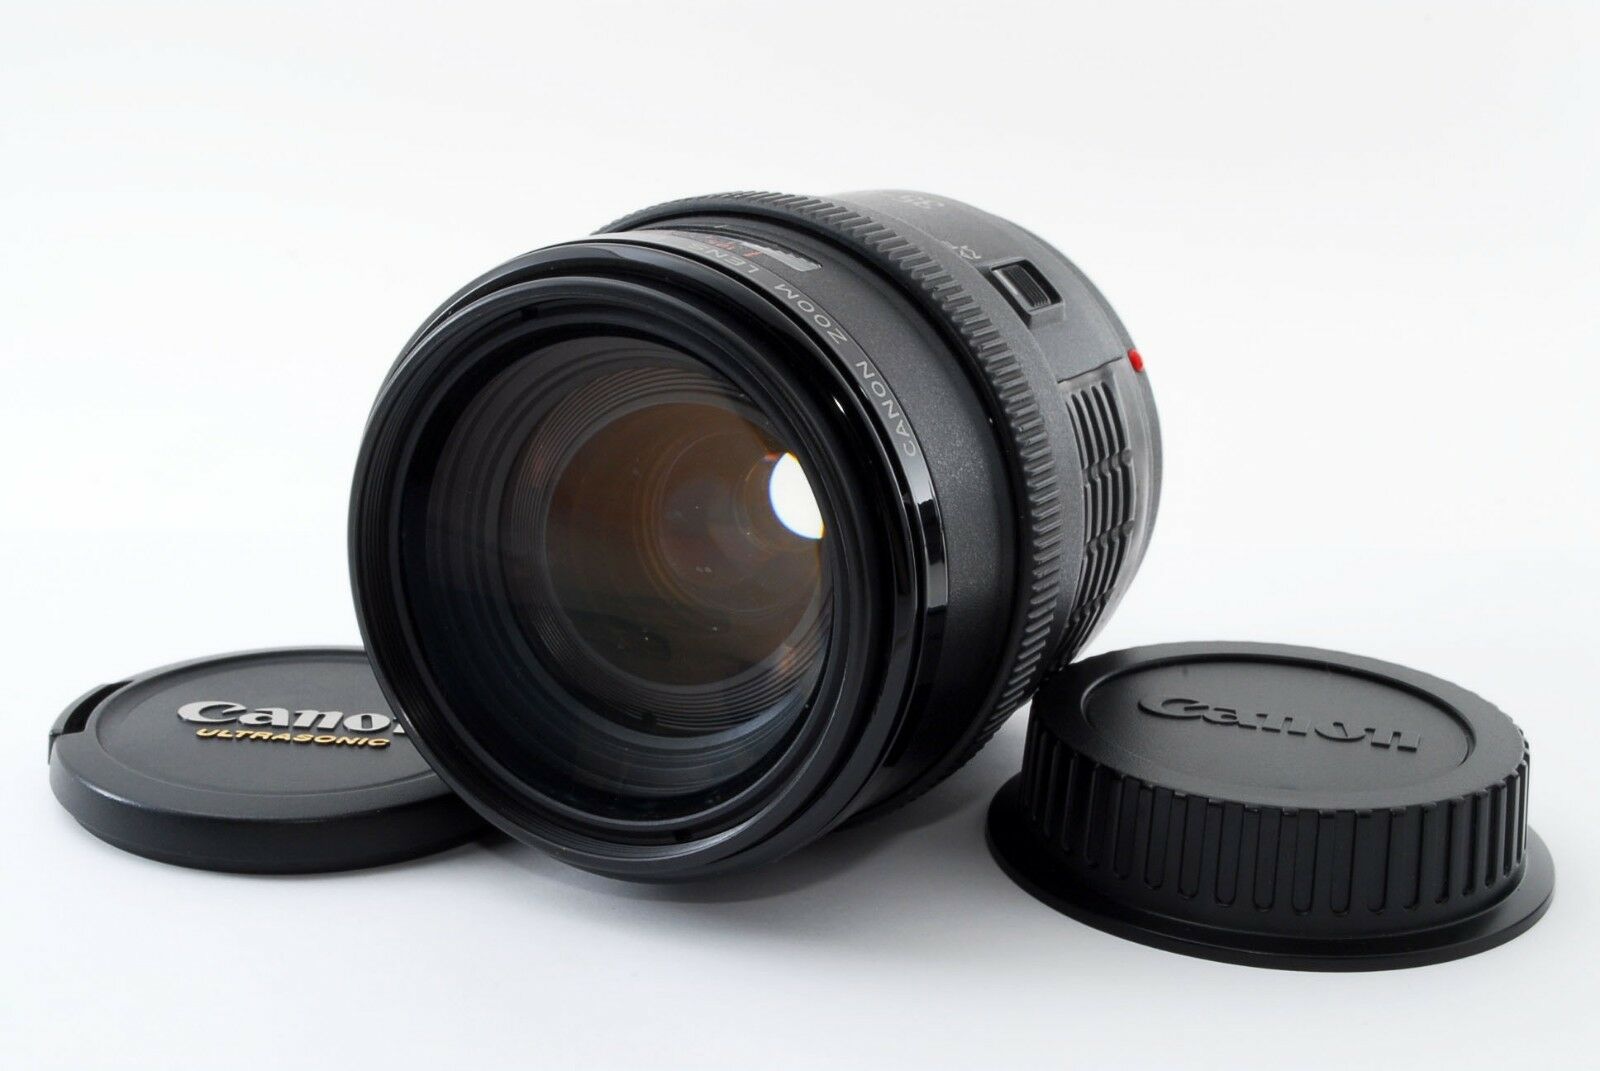 Canon EF 35-105mm f/3.5-4.5 Lens - Lenses and Cameras